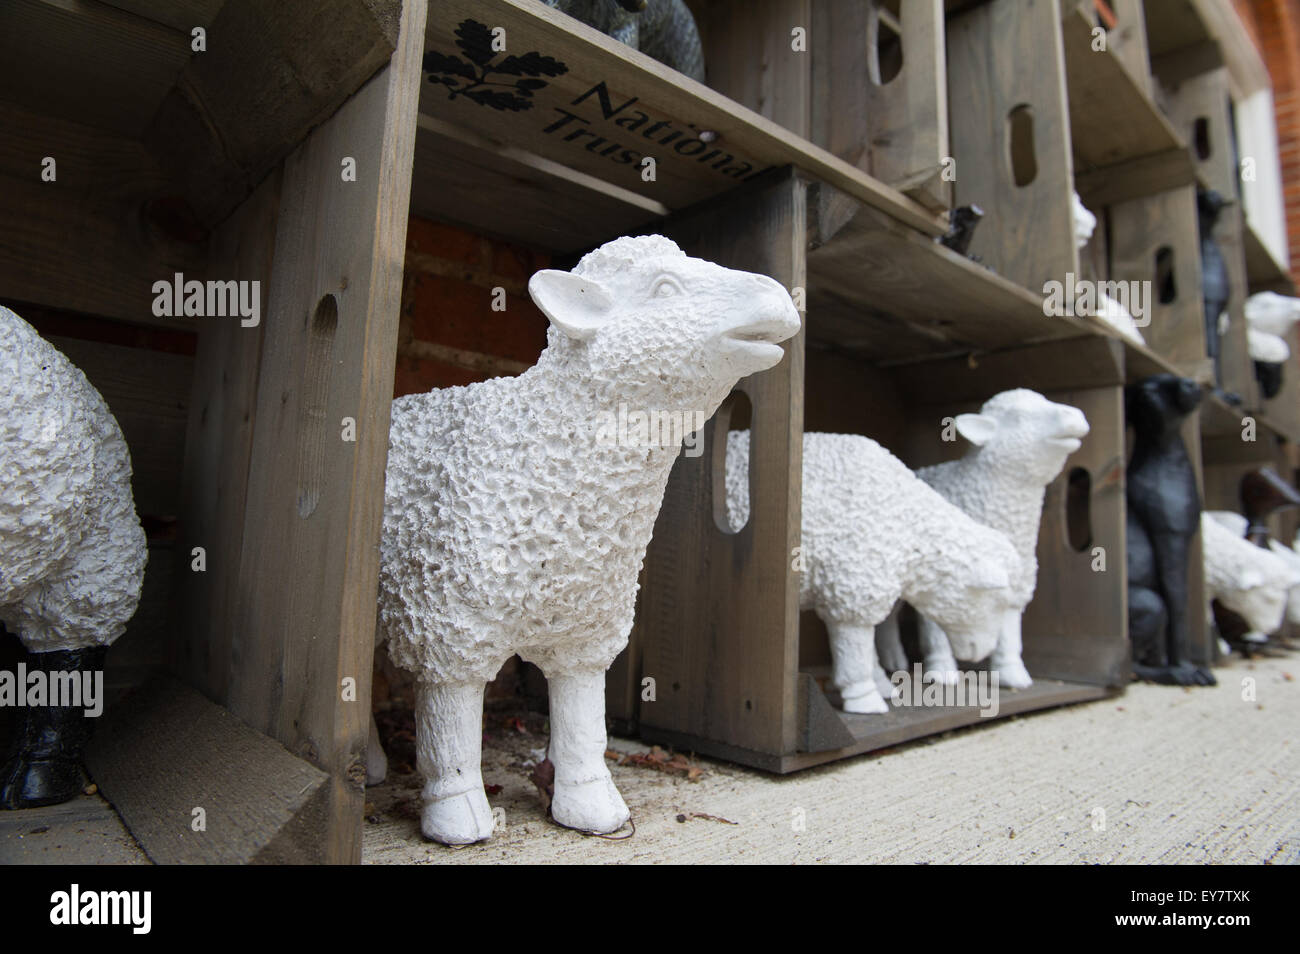 White painted sculptured sheep on display in wooden boxes. Stock Photo